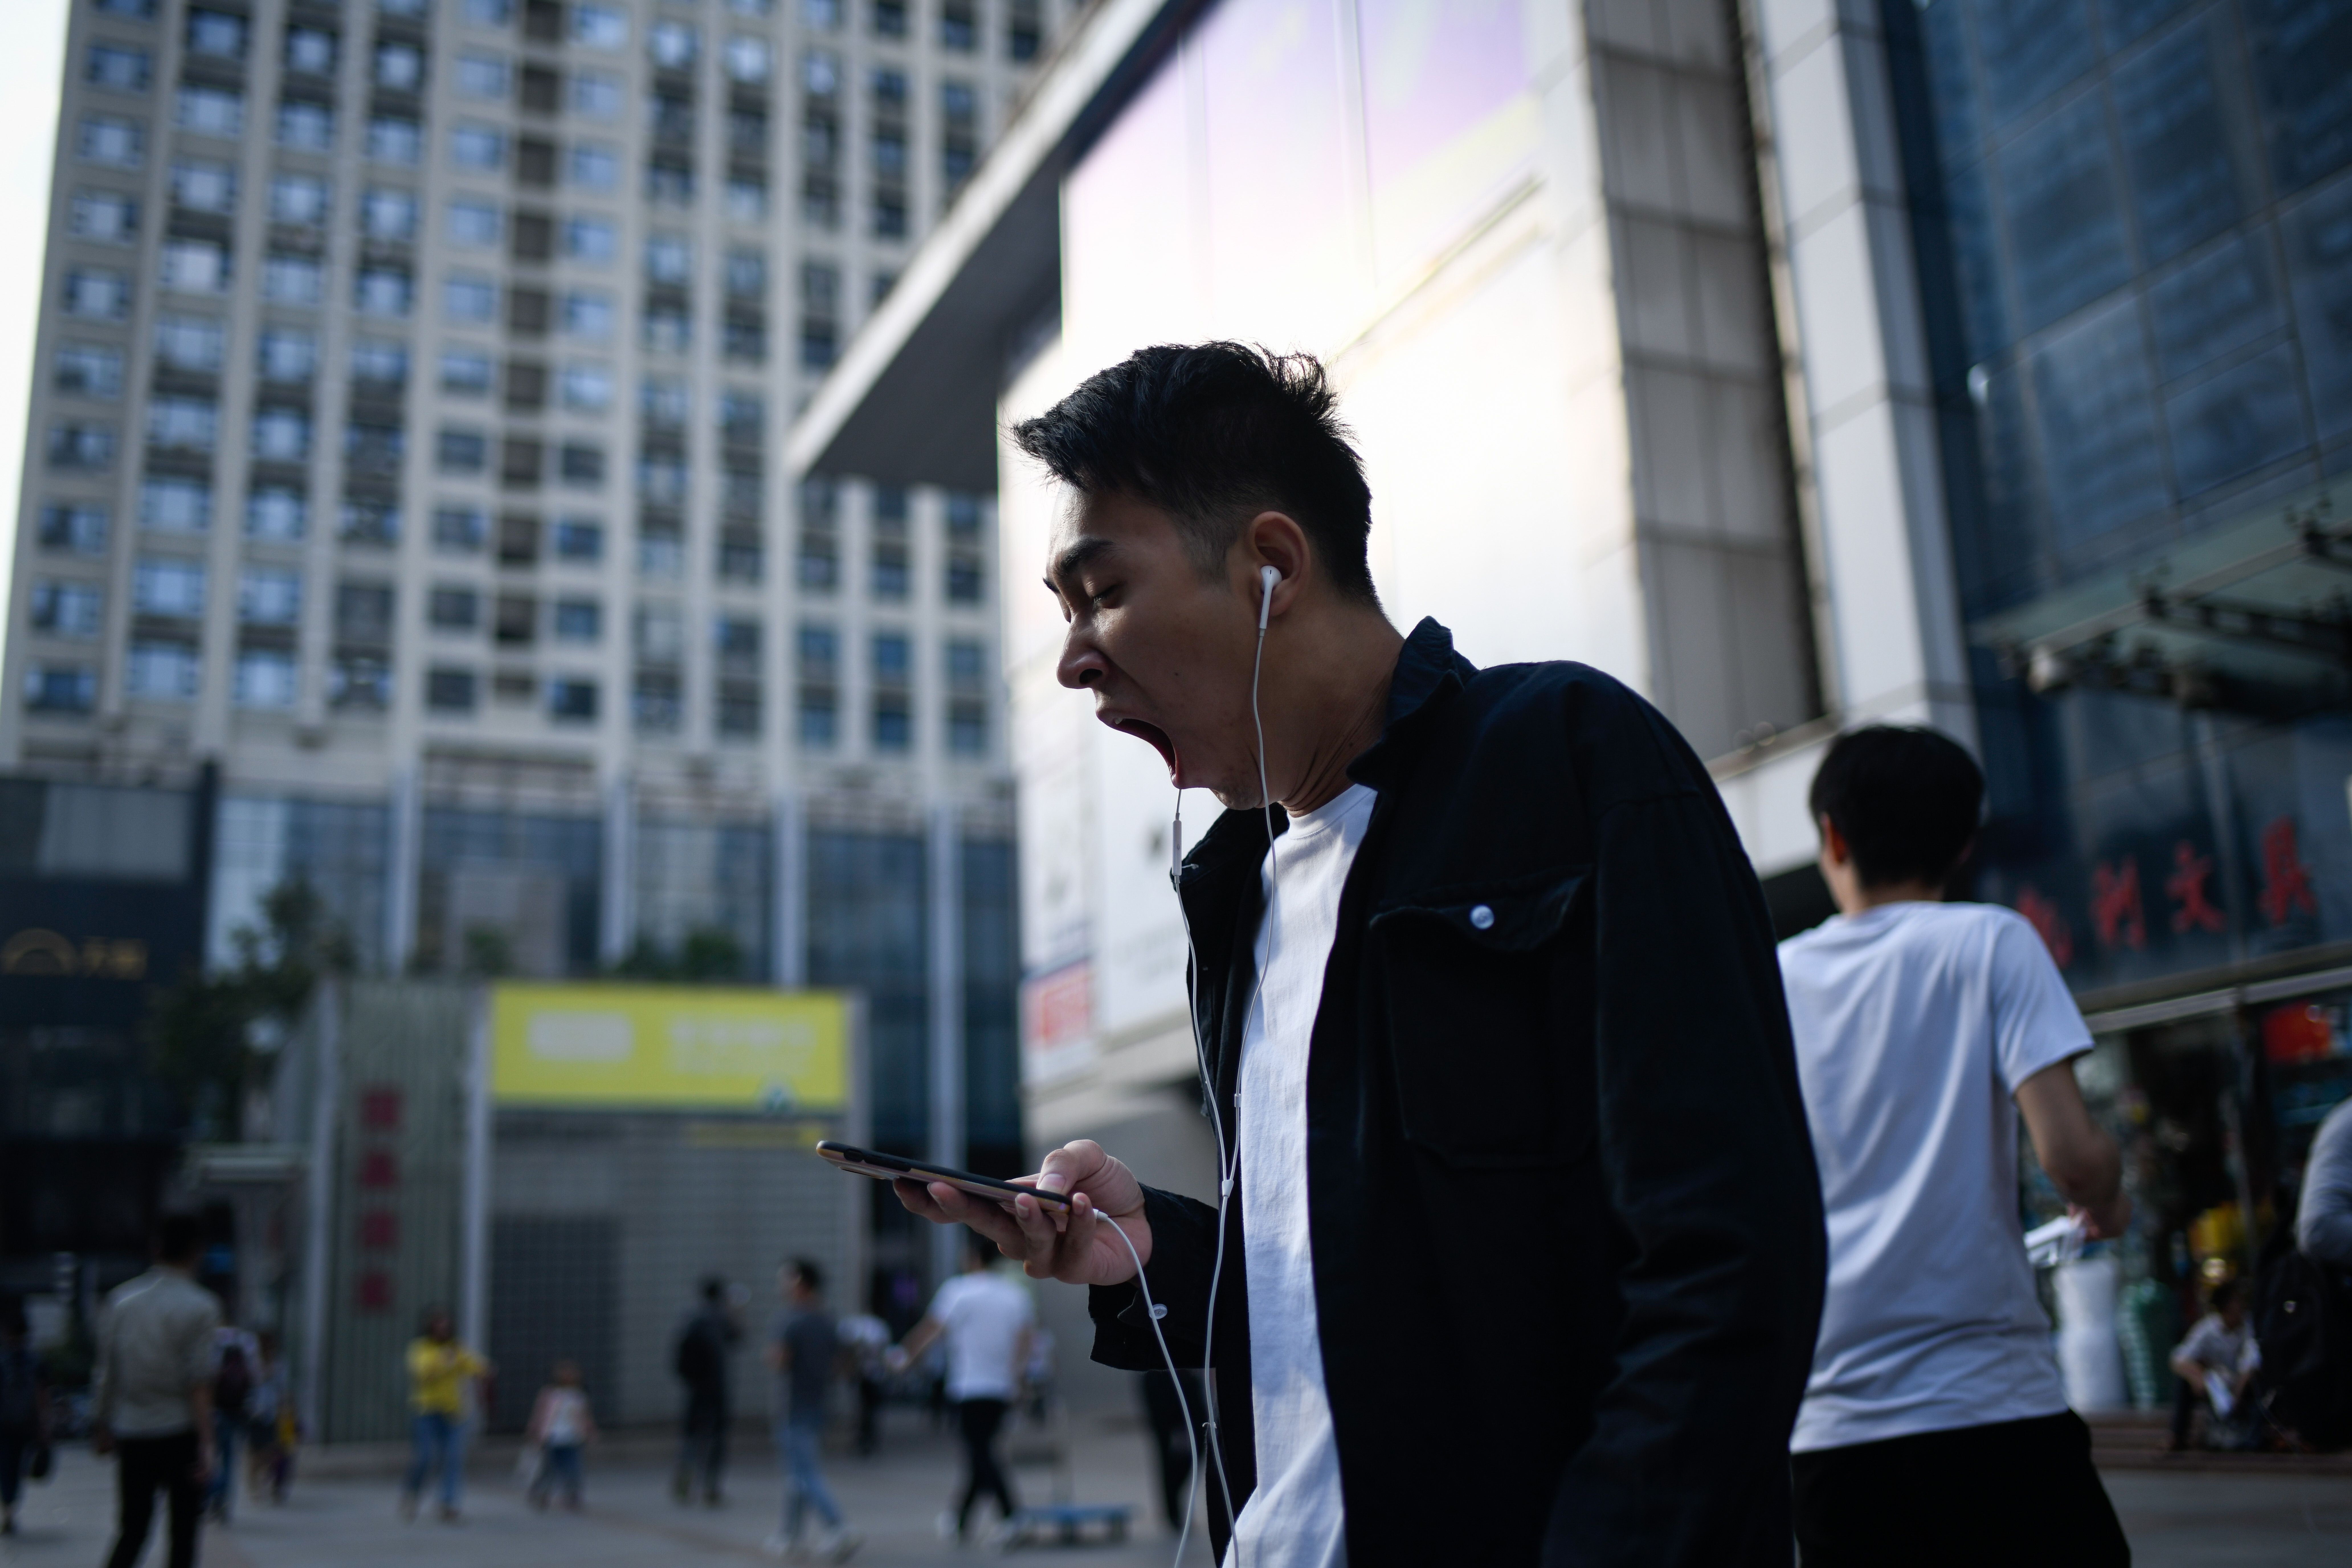 A man yawns as he walks in Shenzhen, the southern Chinese city sometimes known as the Silicon Valley of China. Photo: AFP